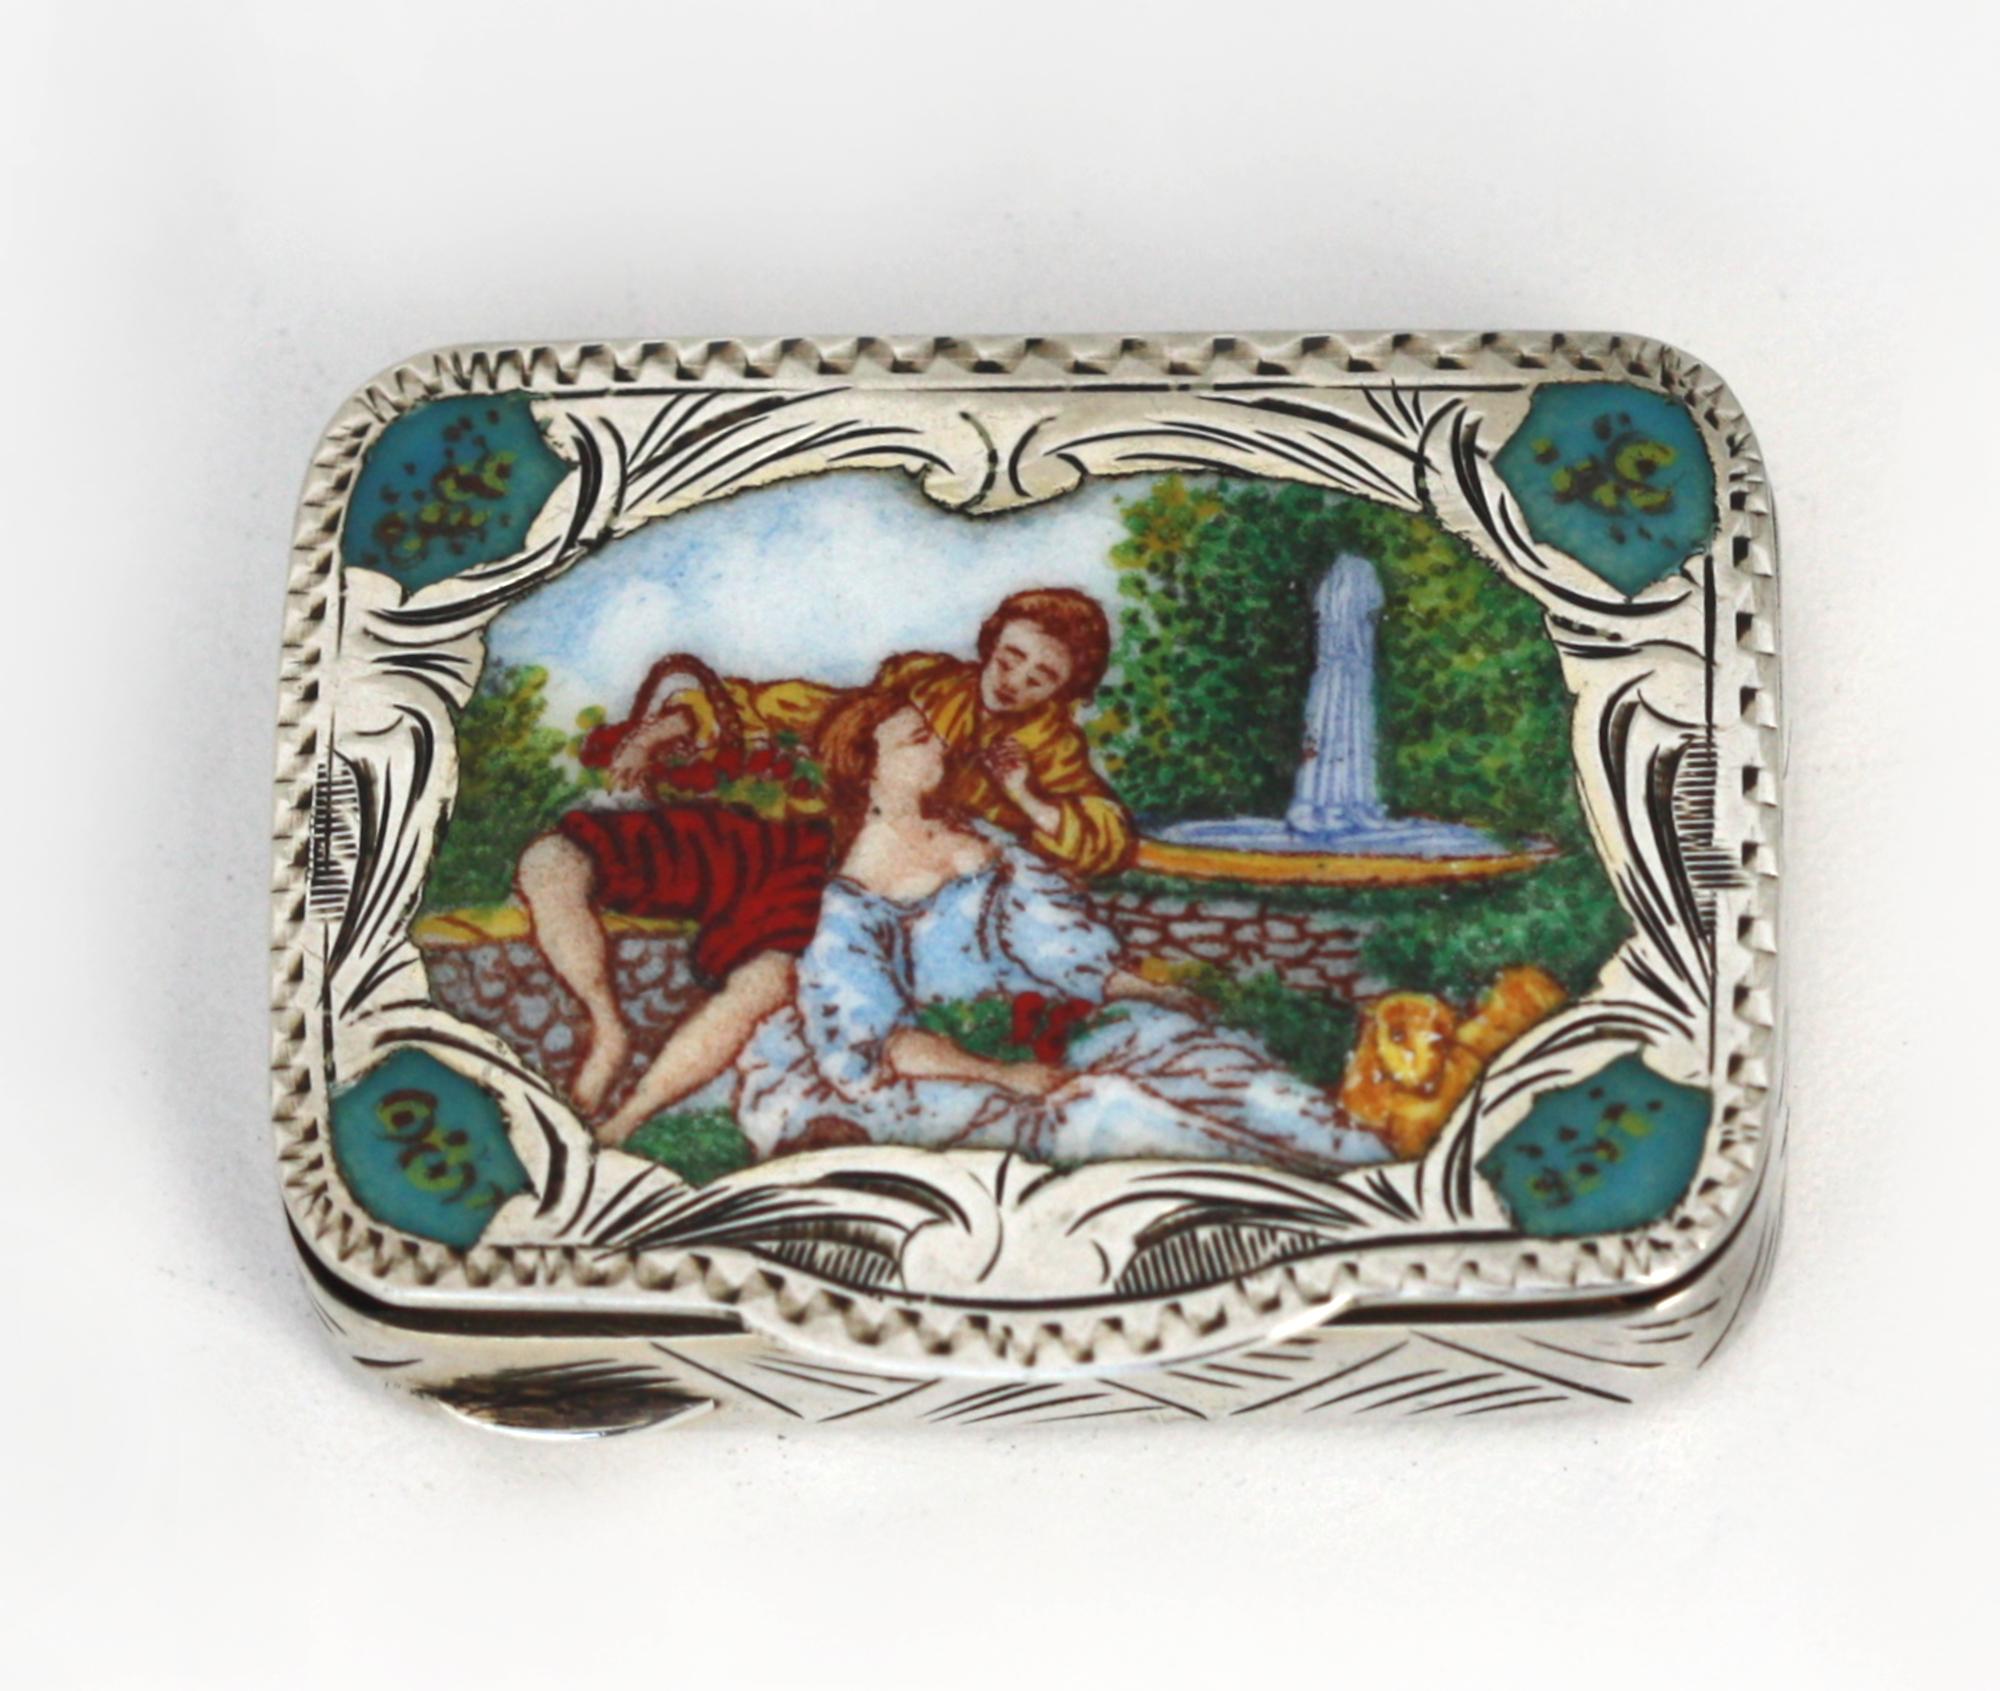 
Italian/French Enamel and Silver Snuff Box.
Late 19th Century, the interior lid impressed 22, no other visible marks. The rectangular hinged box with an interior gilt wash, the lid reserved with enamel depicting an amours couple before a fountain